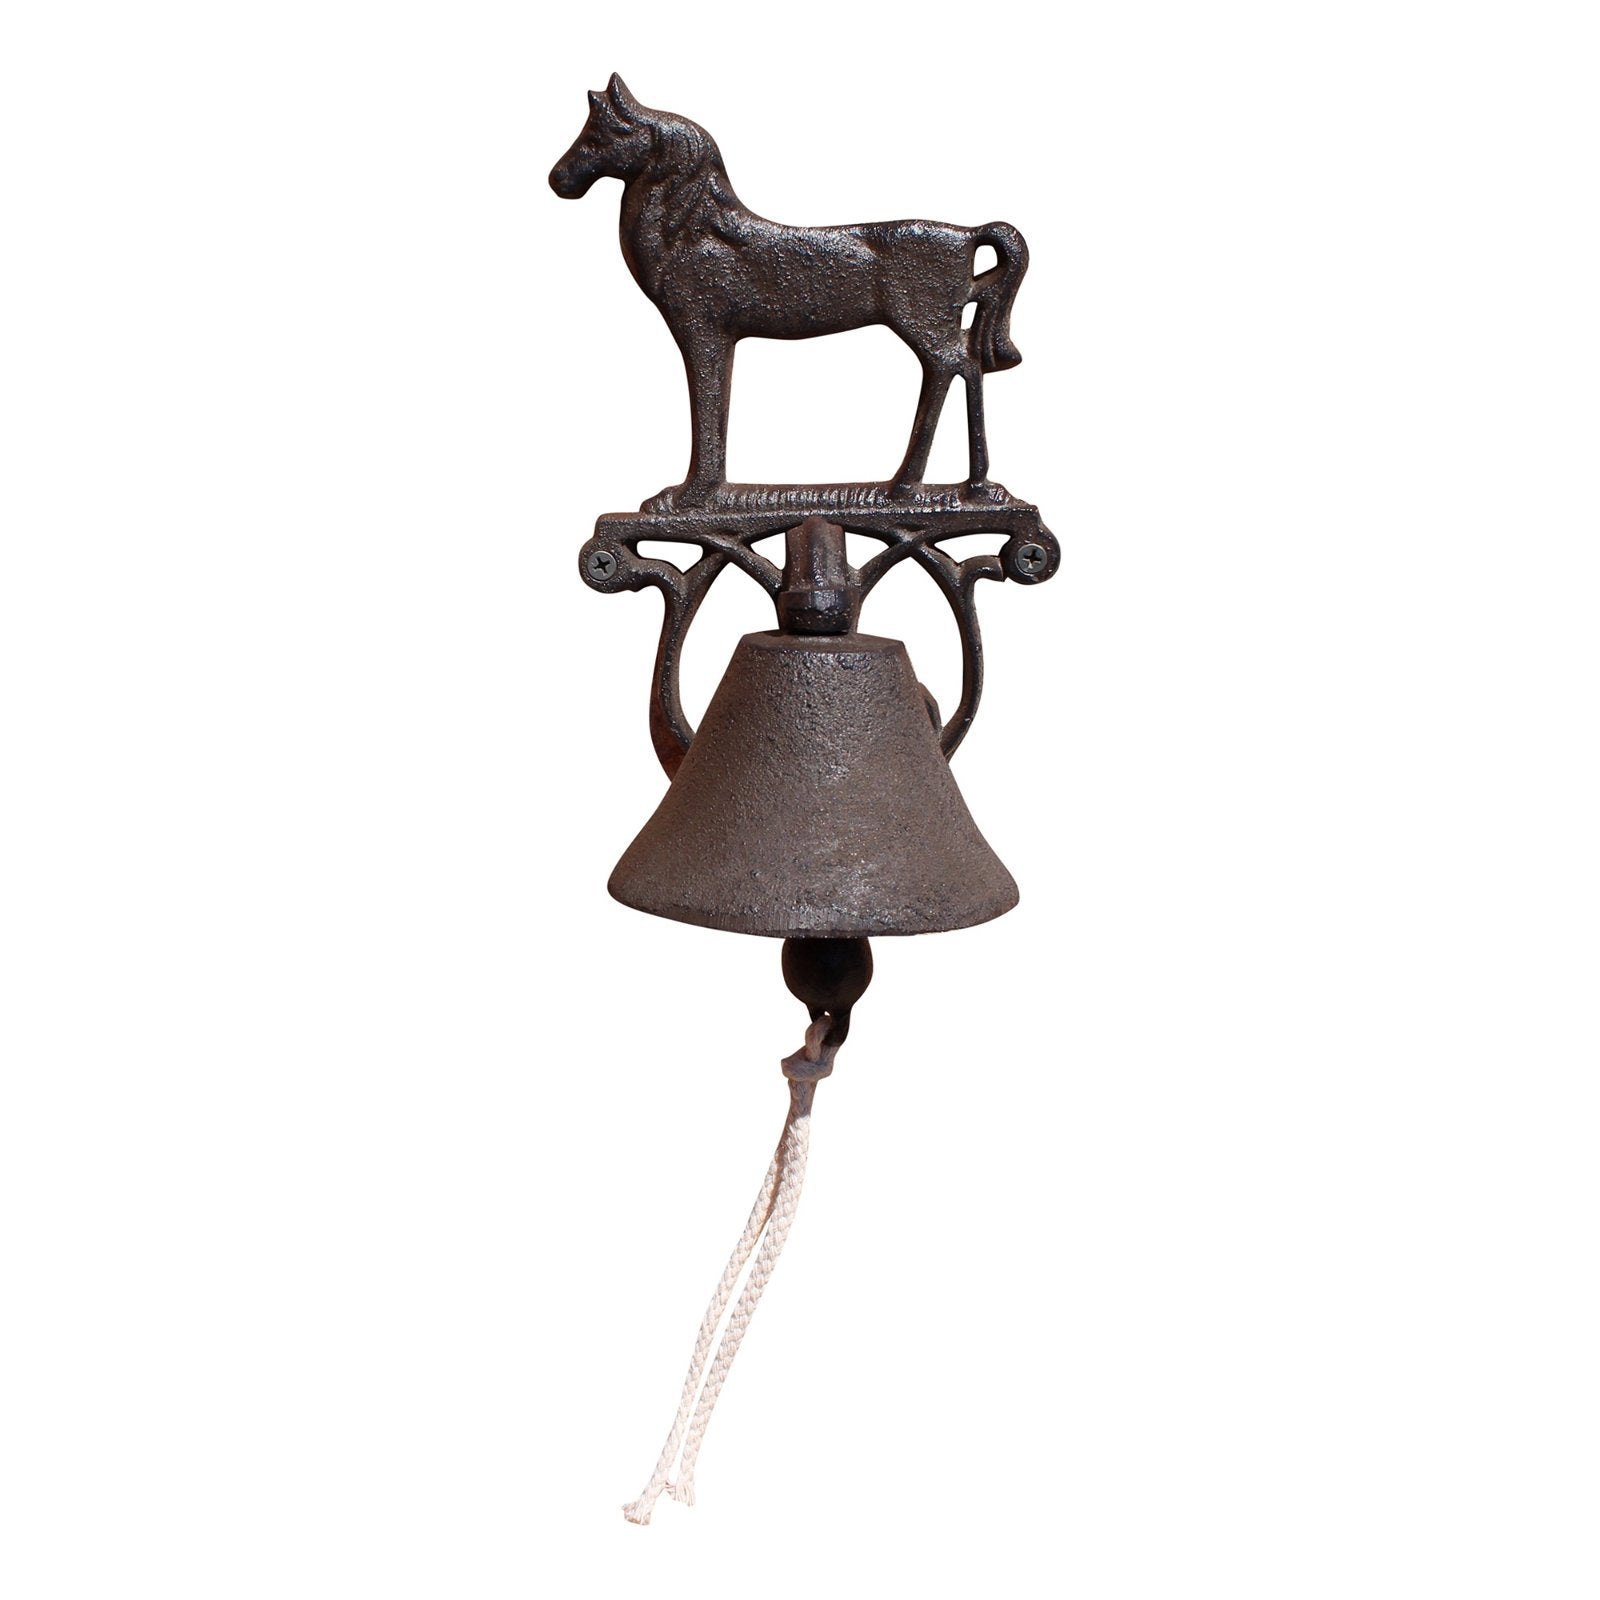 View Rustic Cast Iron Wall Bell Horse information